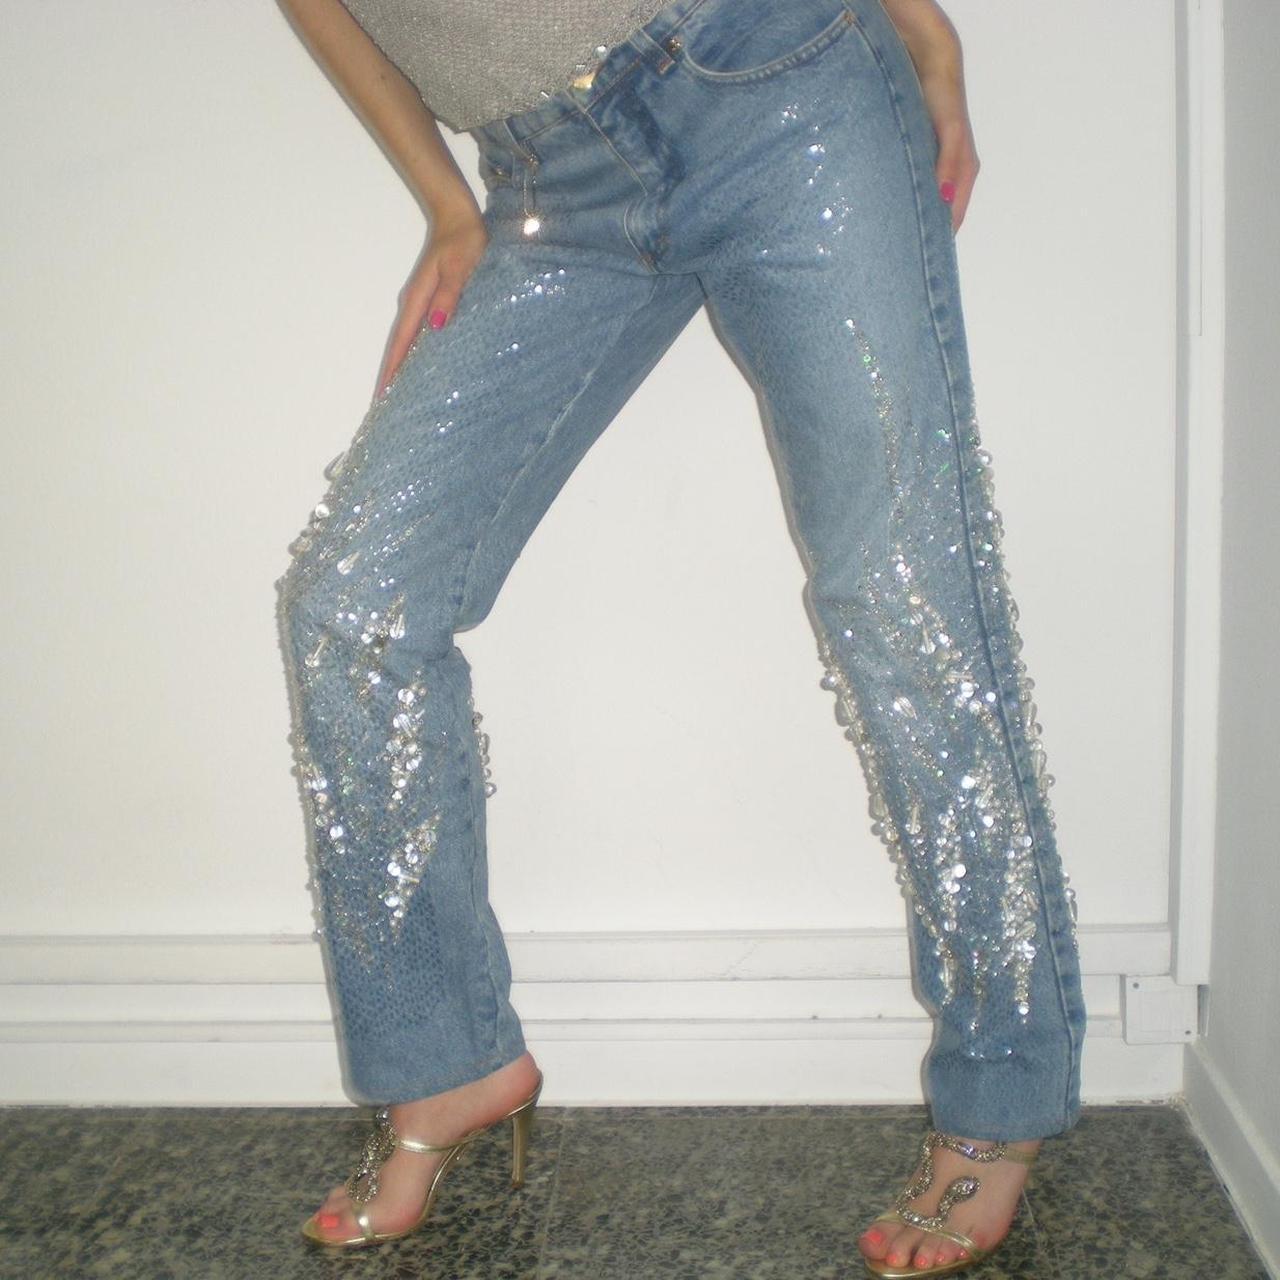 Women's 2000 Roberto Cavalli Embellished Jeans For Sale